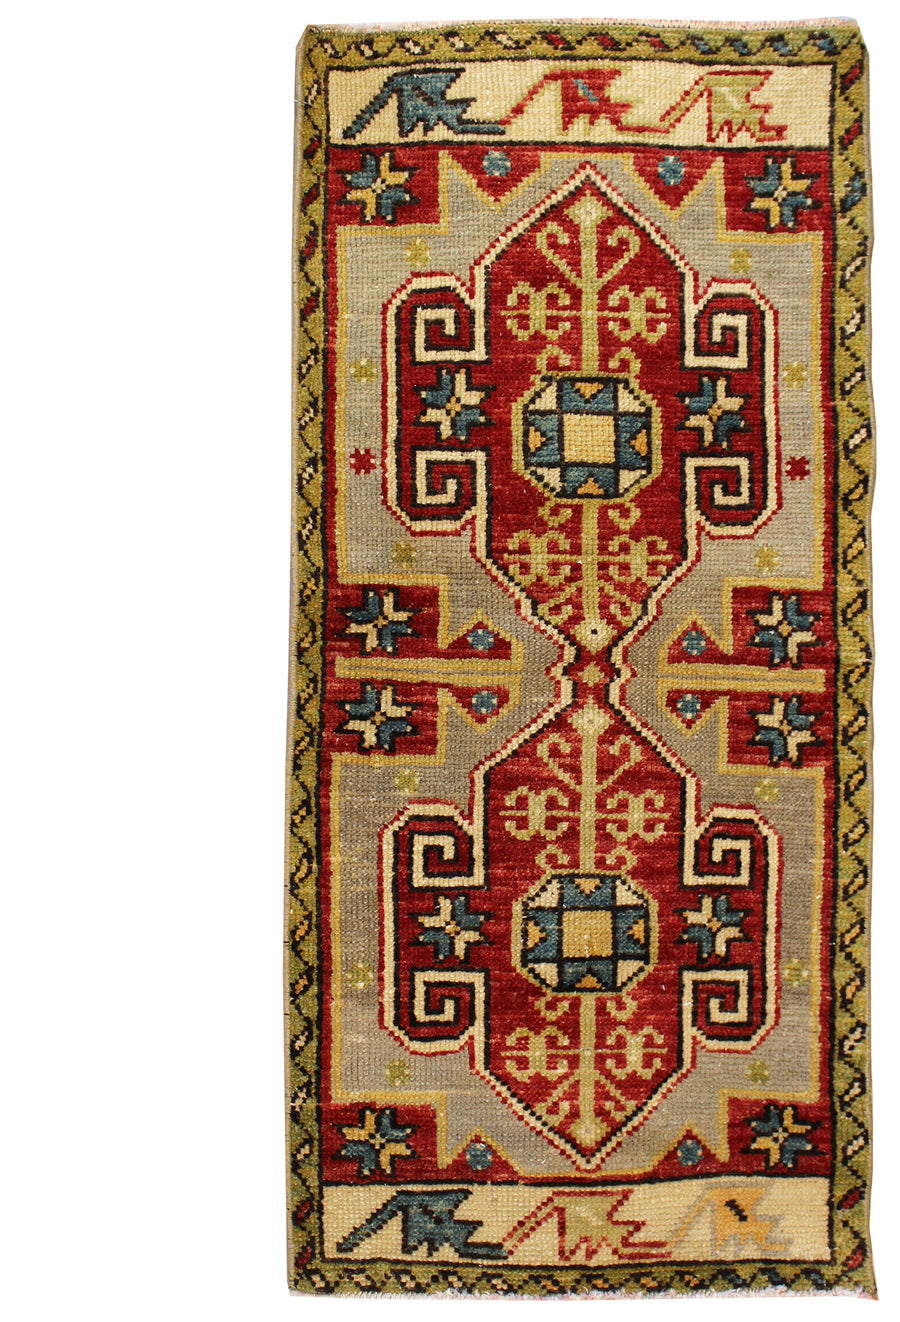 YASTIC HANDKNOTTED RUG, J57021